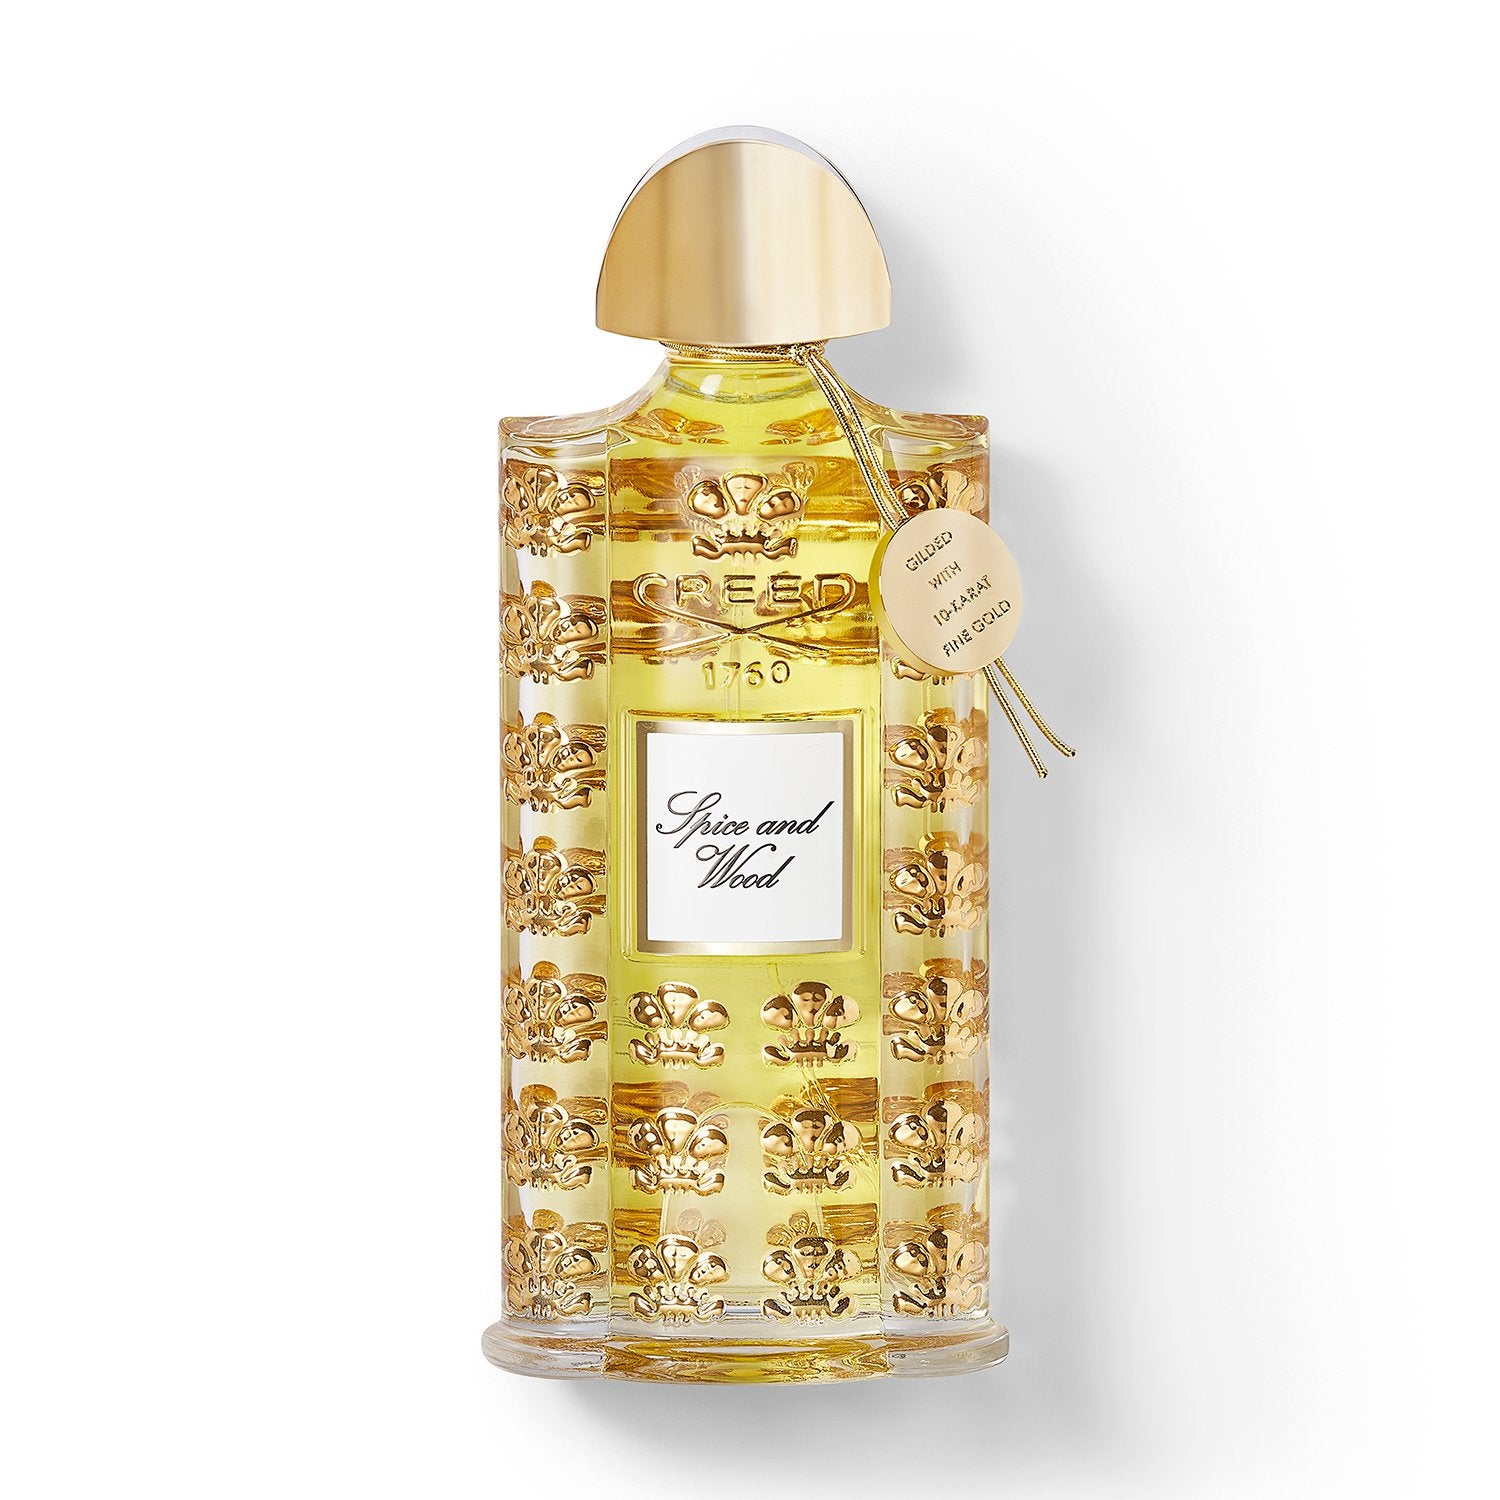 Les Royales Exclusives Spice & Wood EDP 75 ml